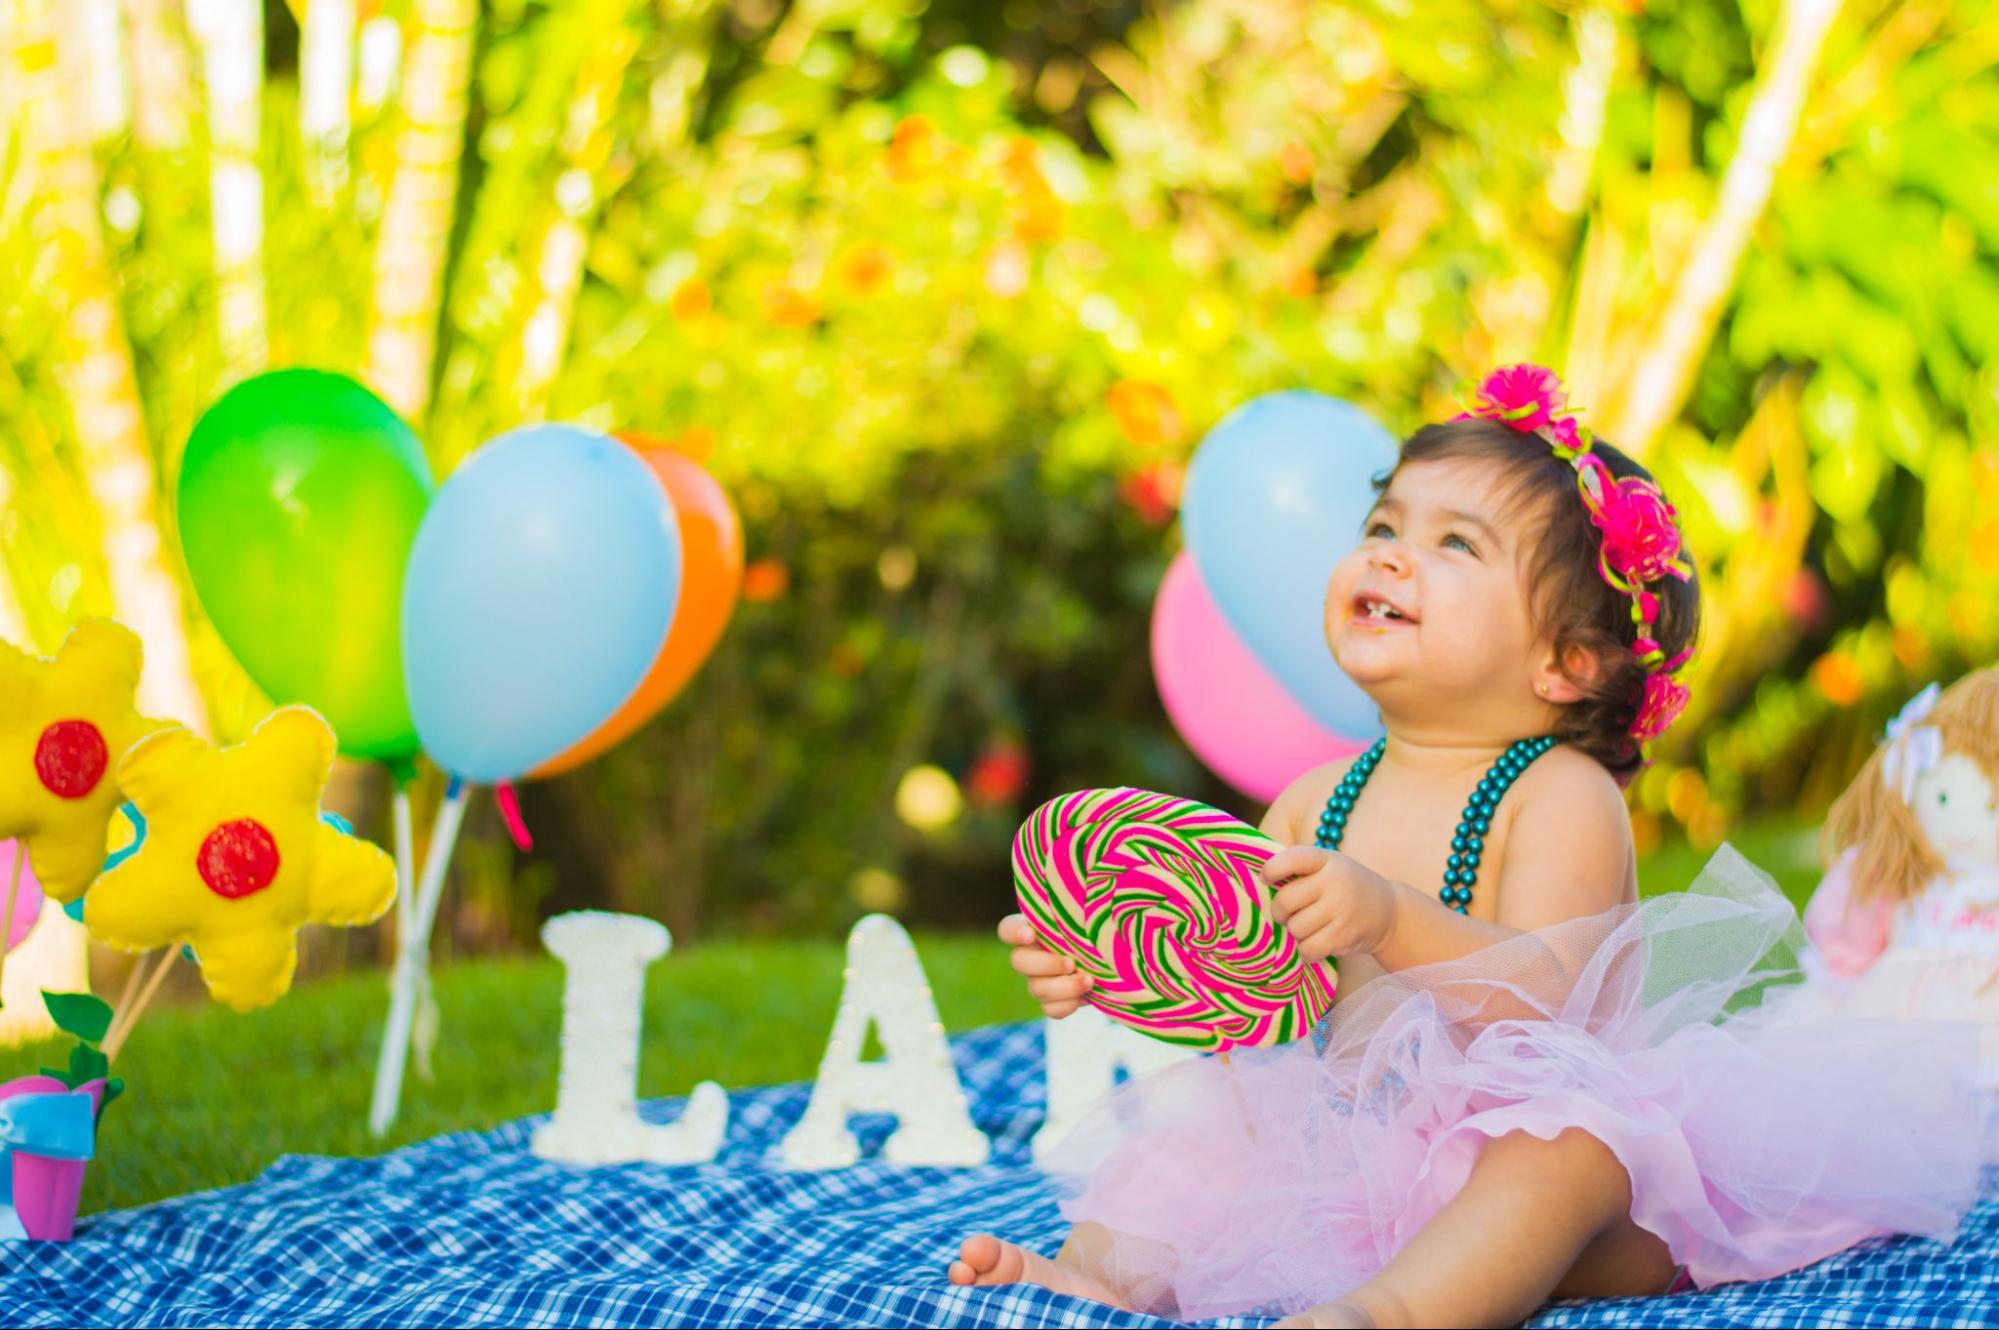 Smiling baby with balloons